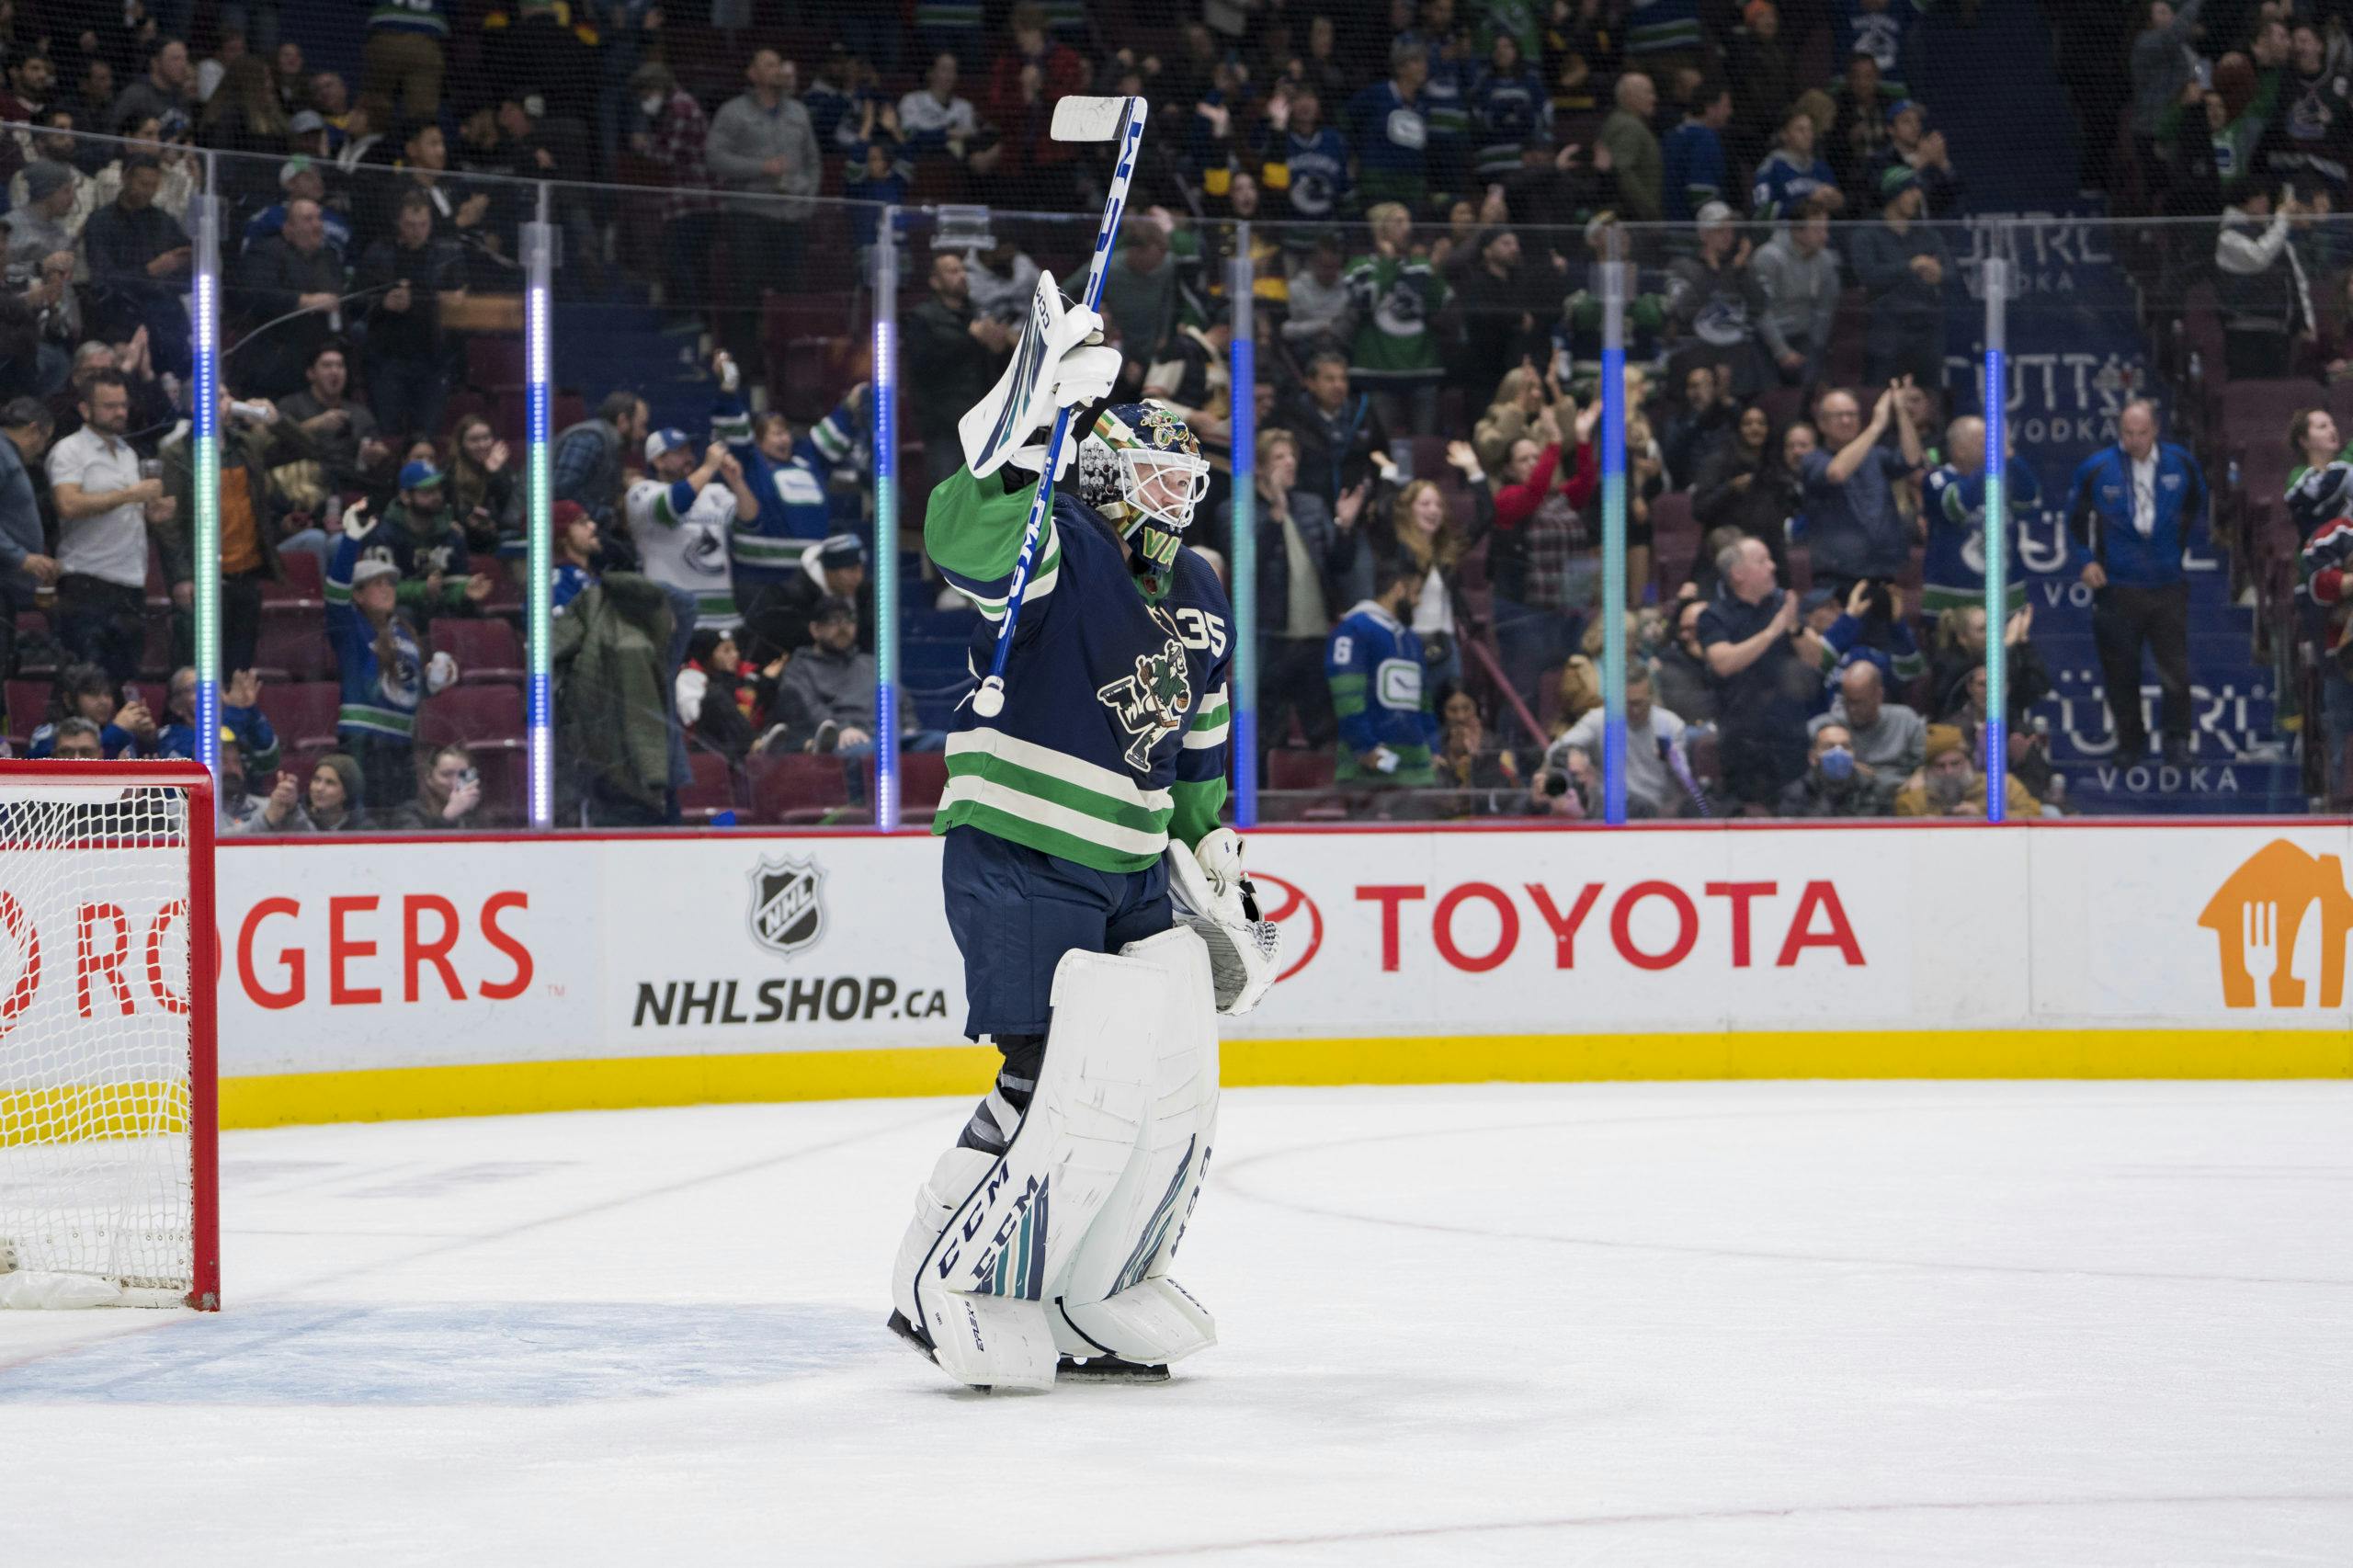 Vancouver Canucks see NHL playoff hopes dashed despite 3-1 win over  Winnipeg - Parksville Qualicum Beach News